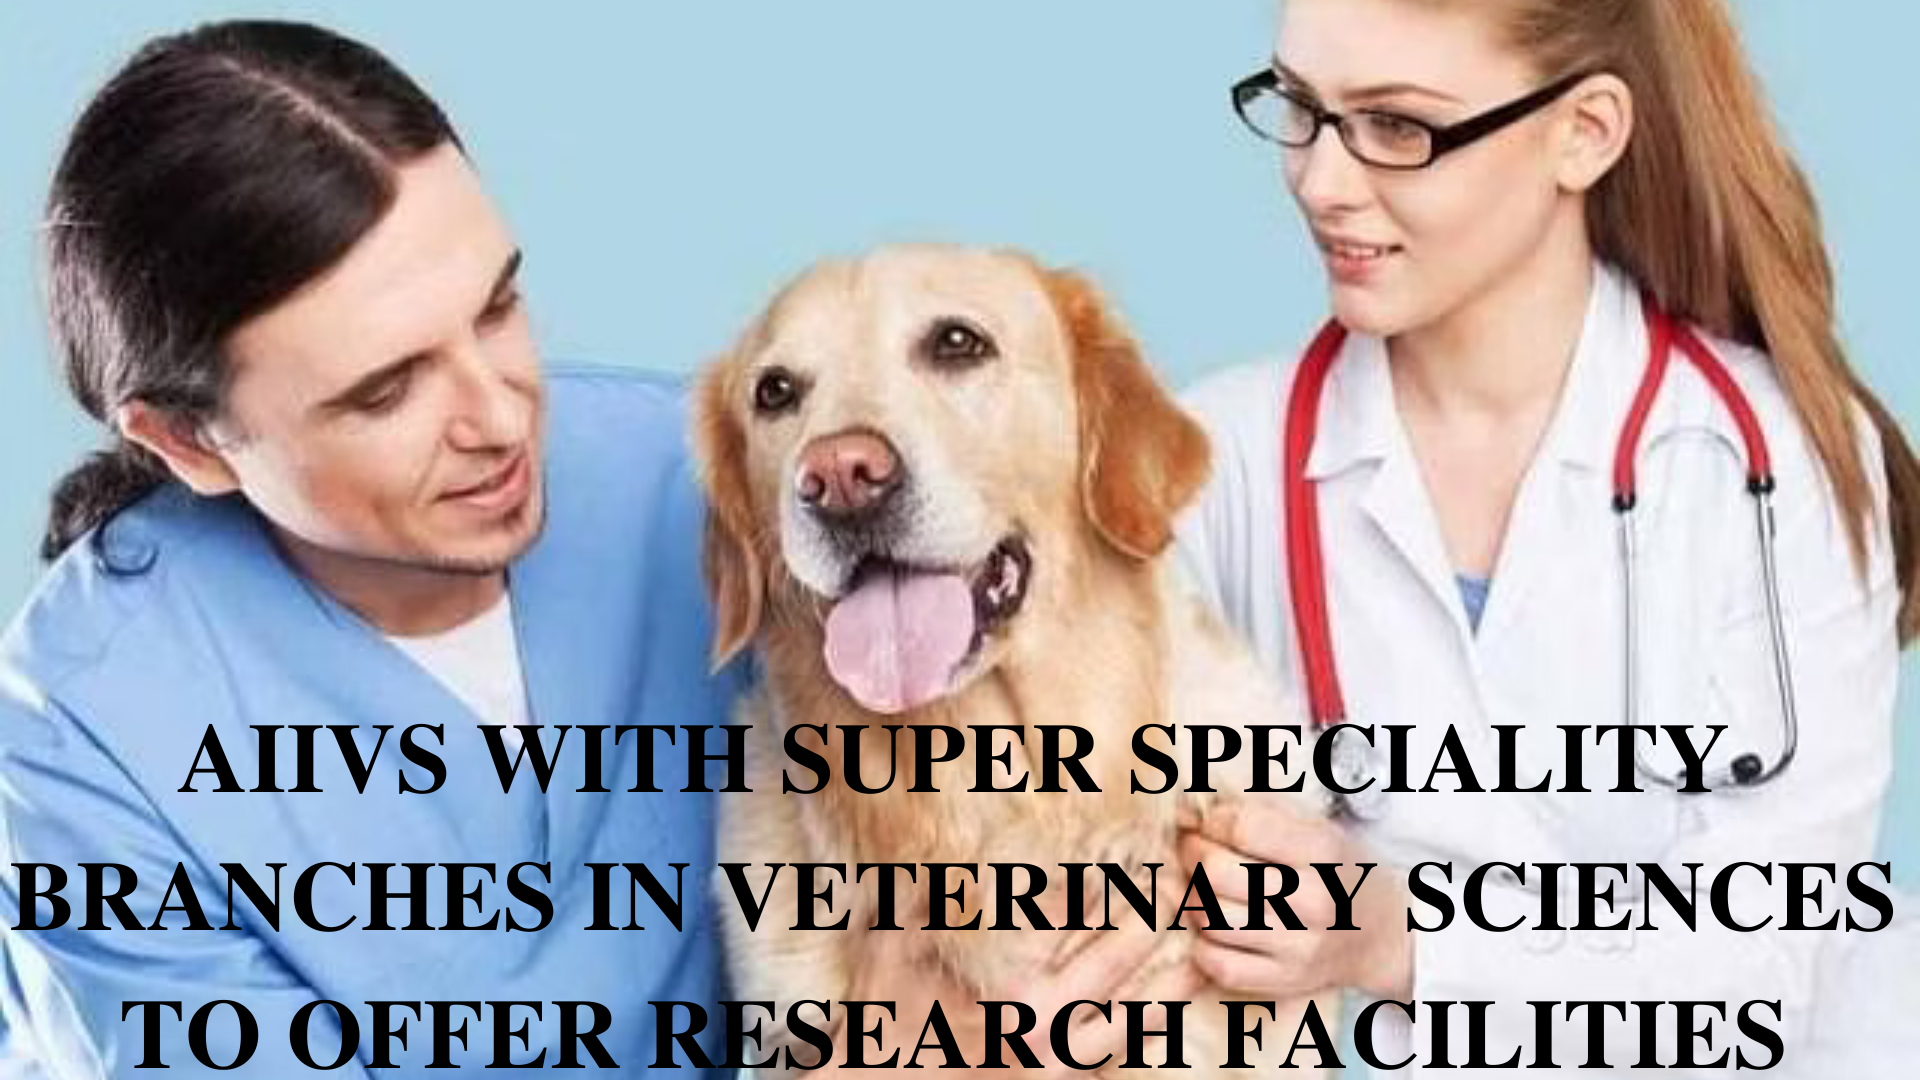 AIIVS WITH SUPER SPECIALITY BRANCHES IN VETERINARY SCIENCES TO OFFER RESEARCH FACILITIES